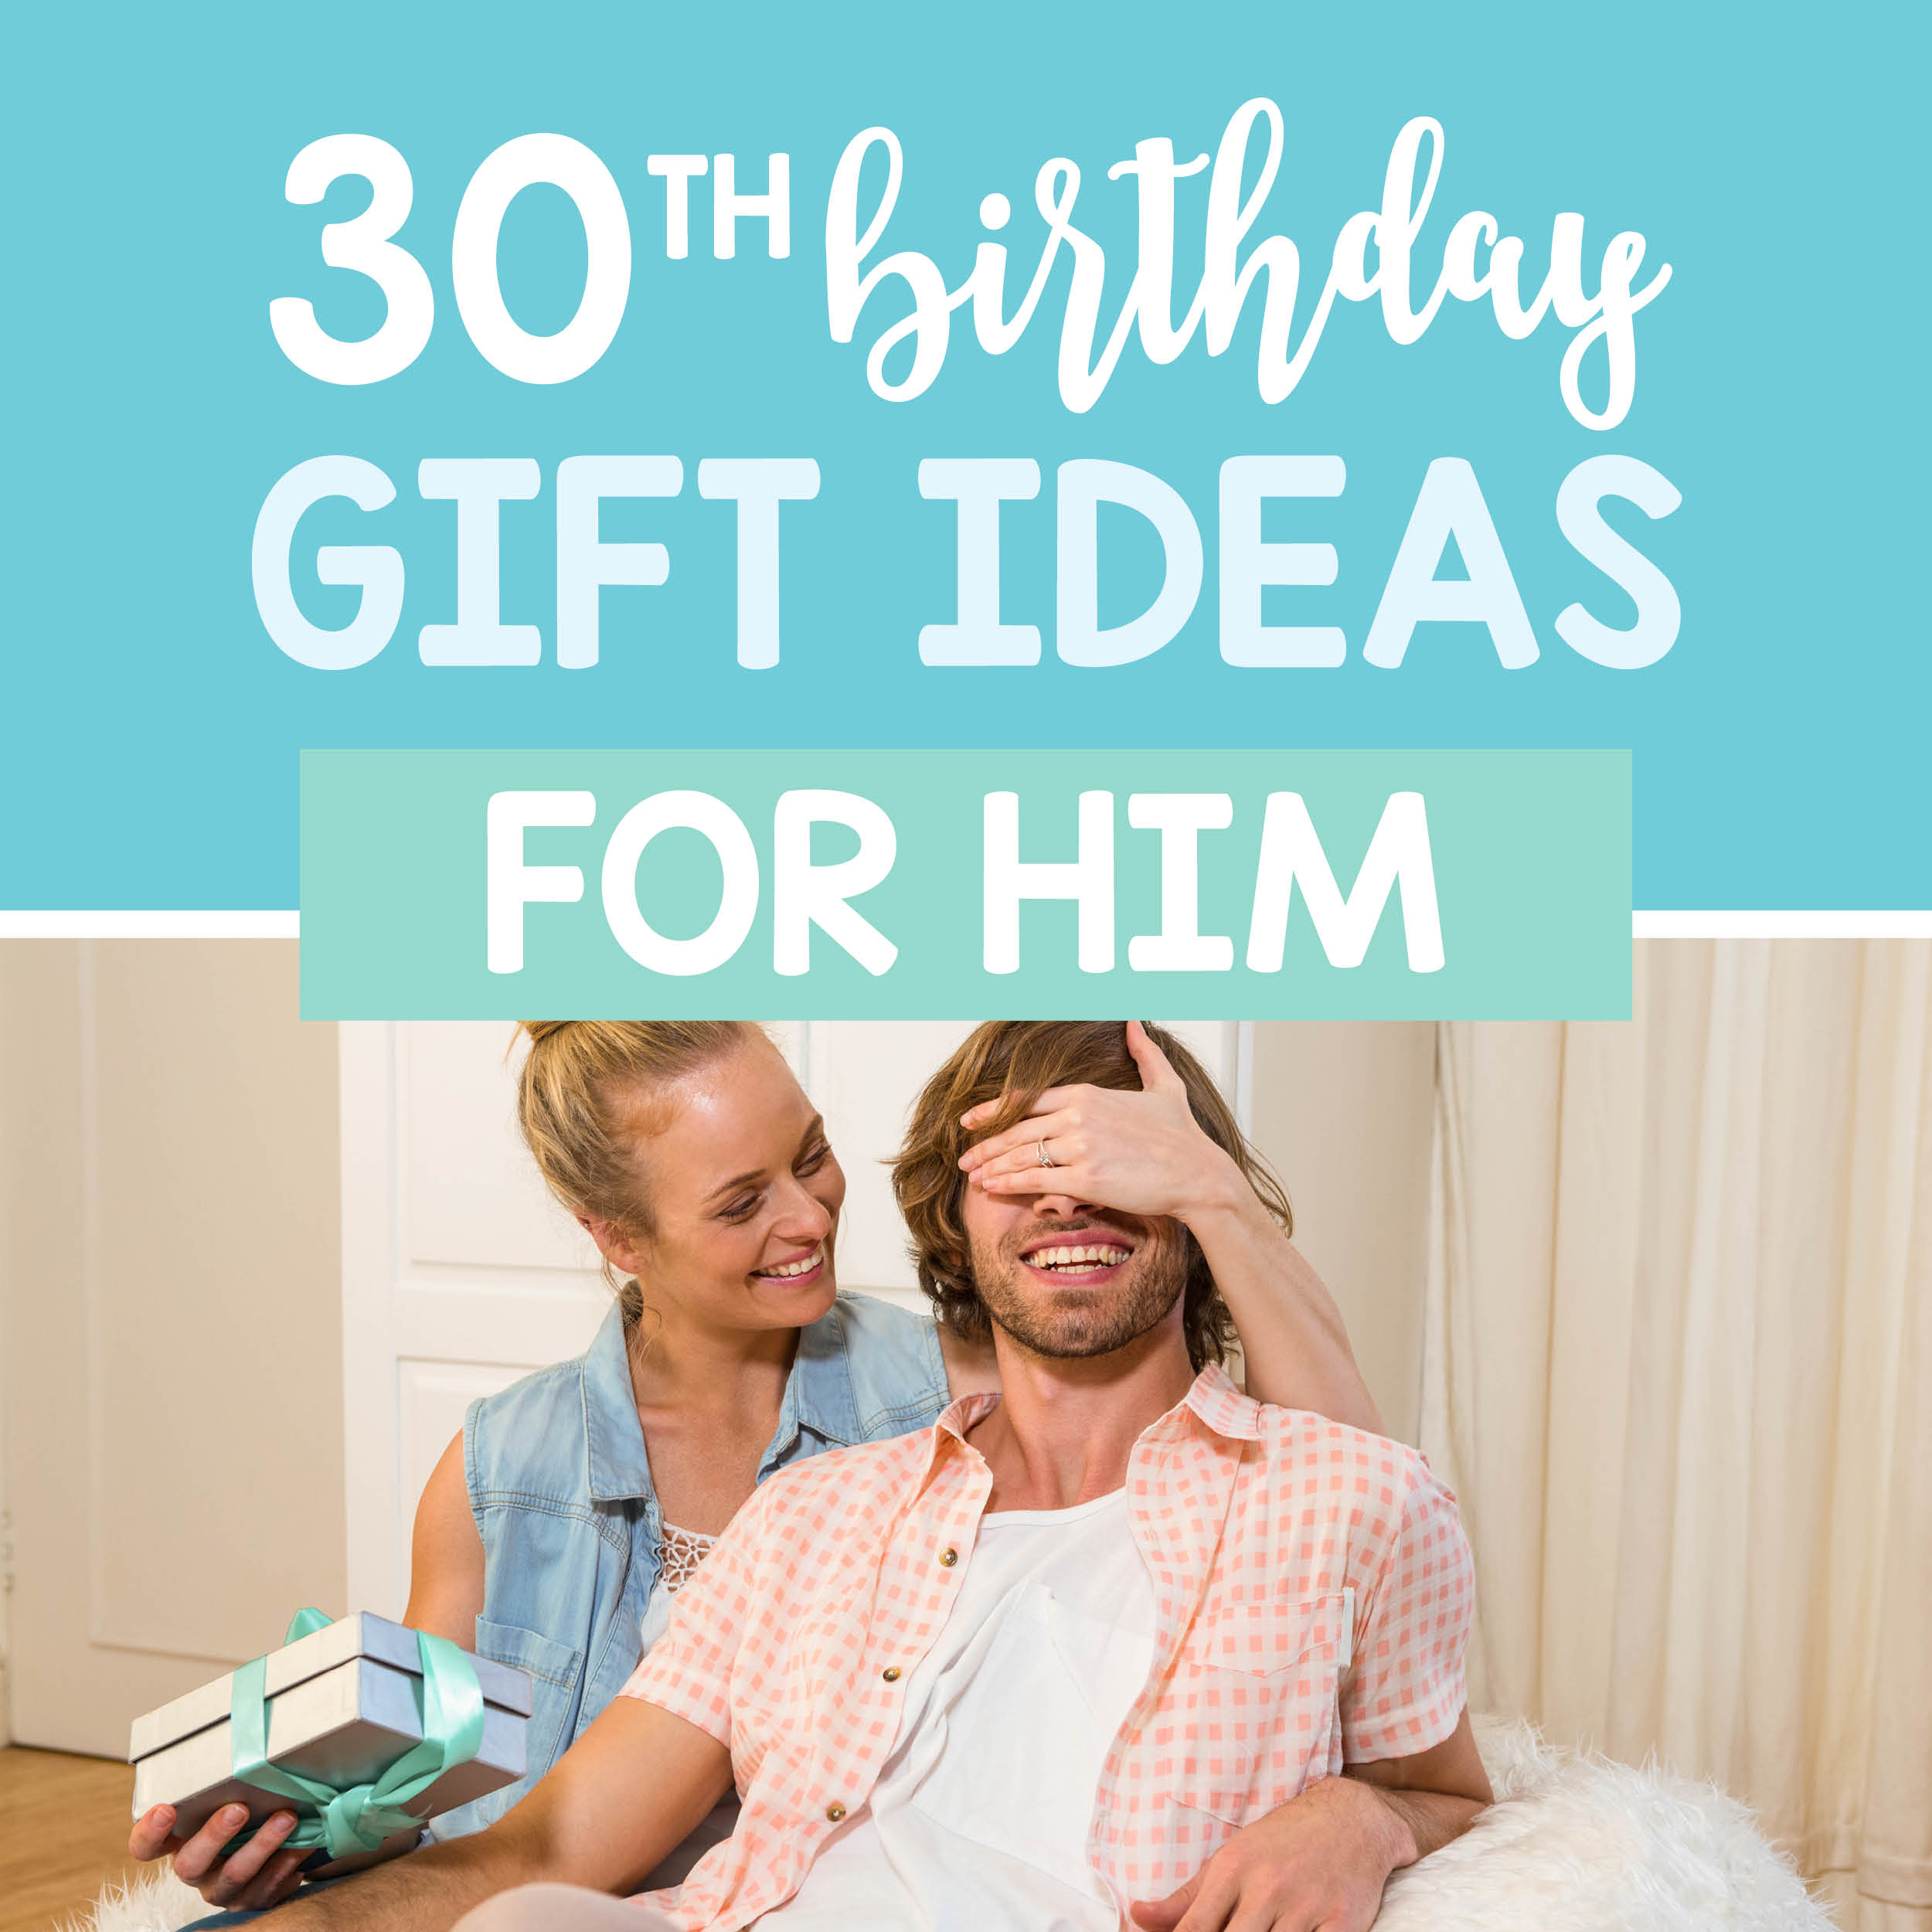 Birthday Gift For Him In His 30s | The 